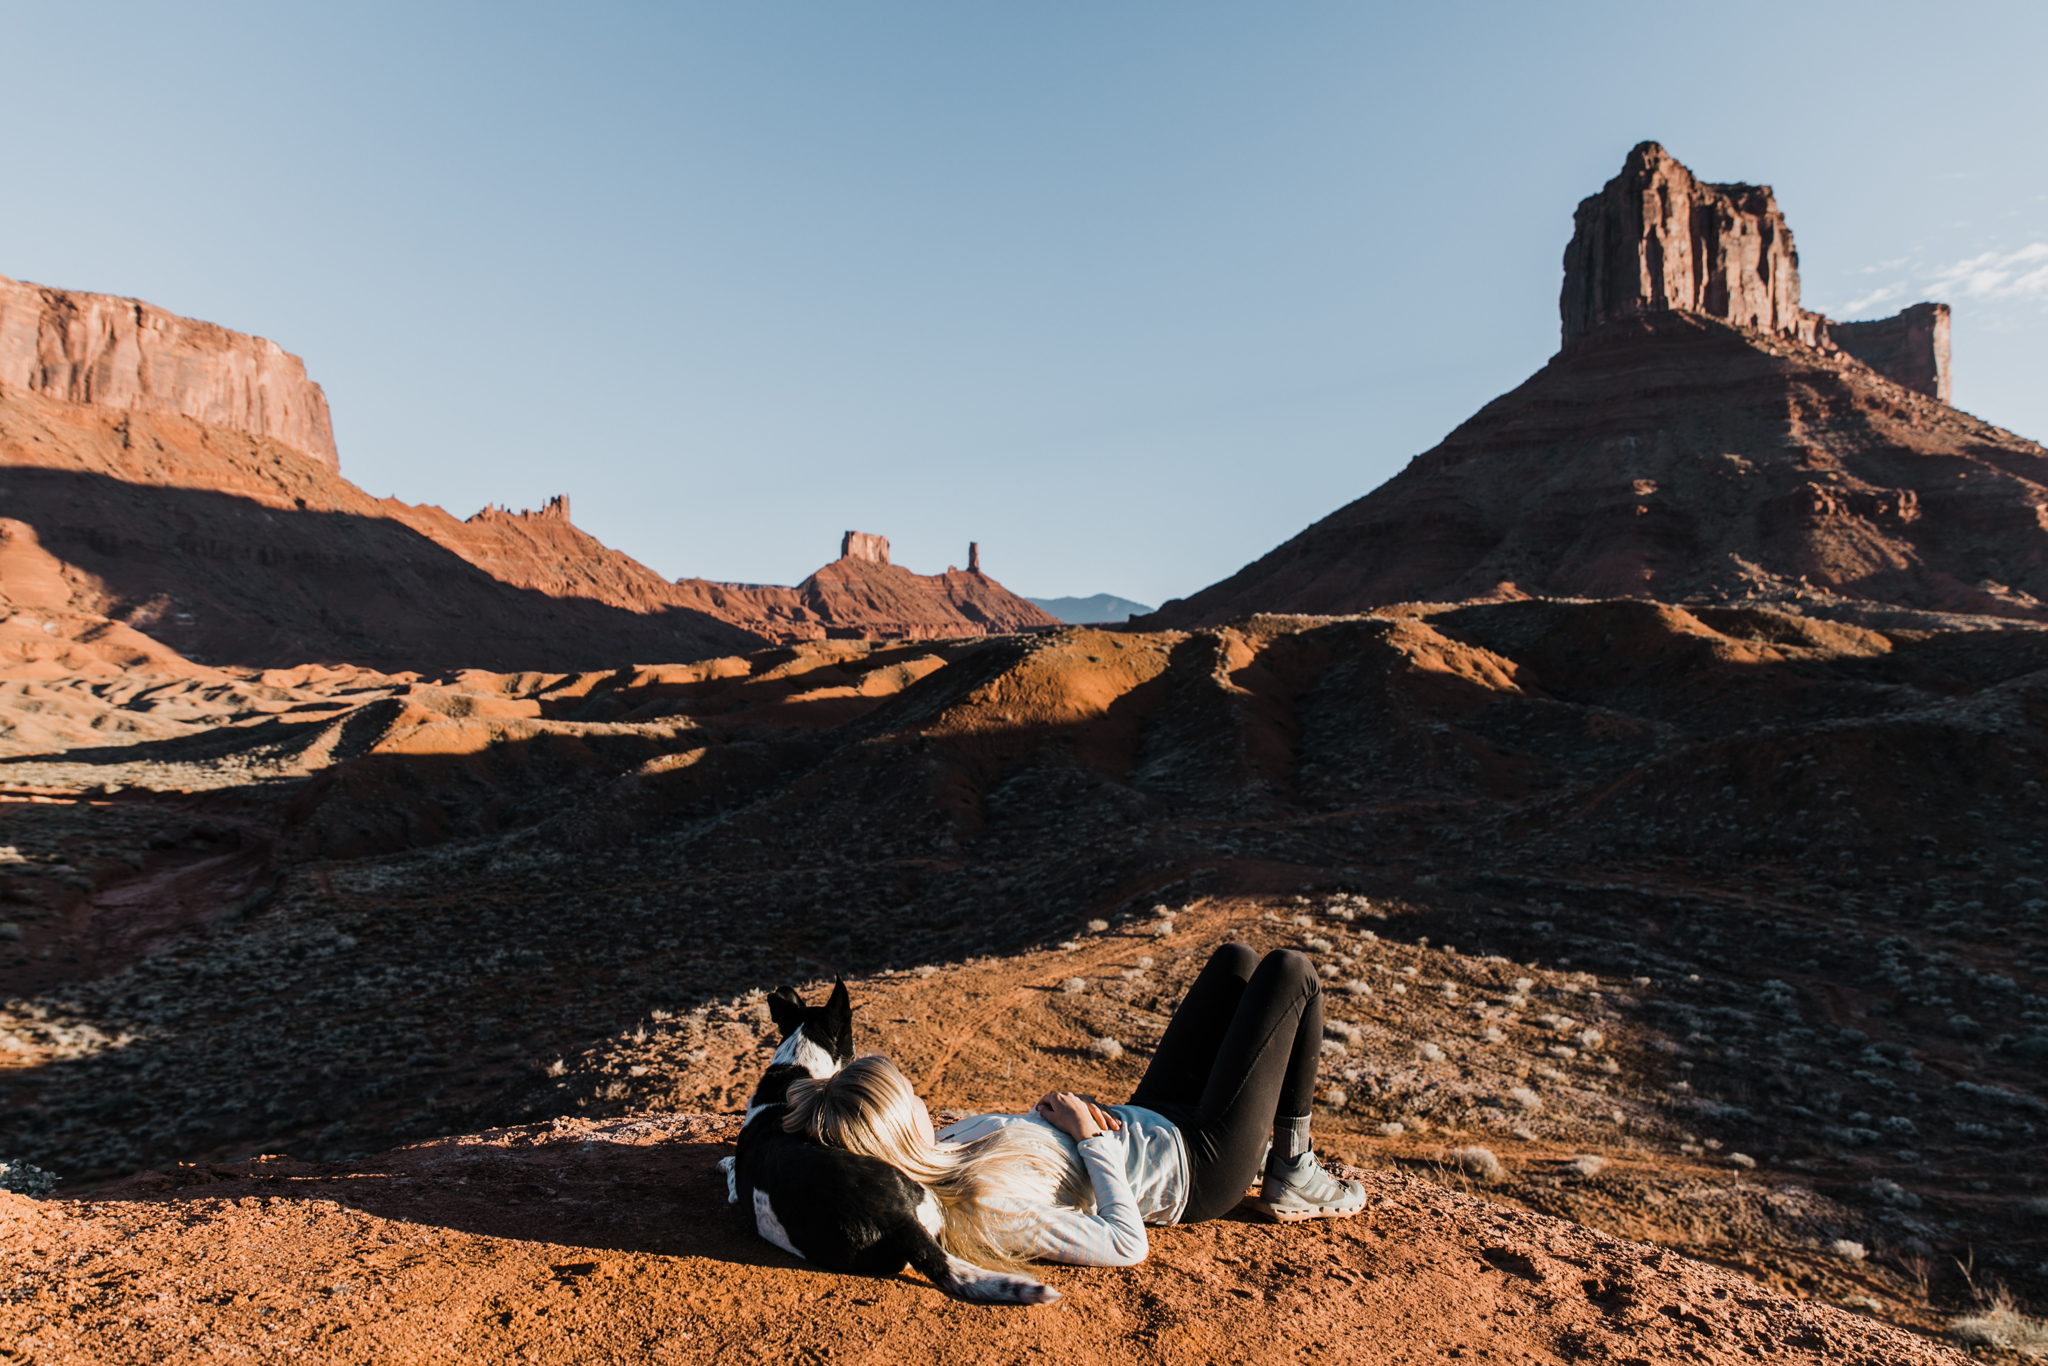 hiking with dogs in moab utah | utah and california adventure elopement photographers | the hearnes adventure photography | www.thehearnes.com